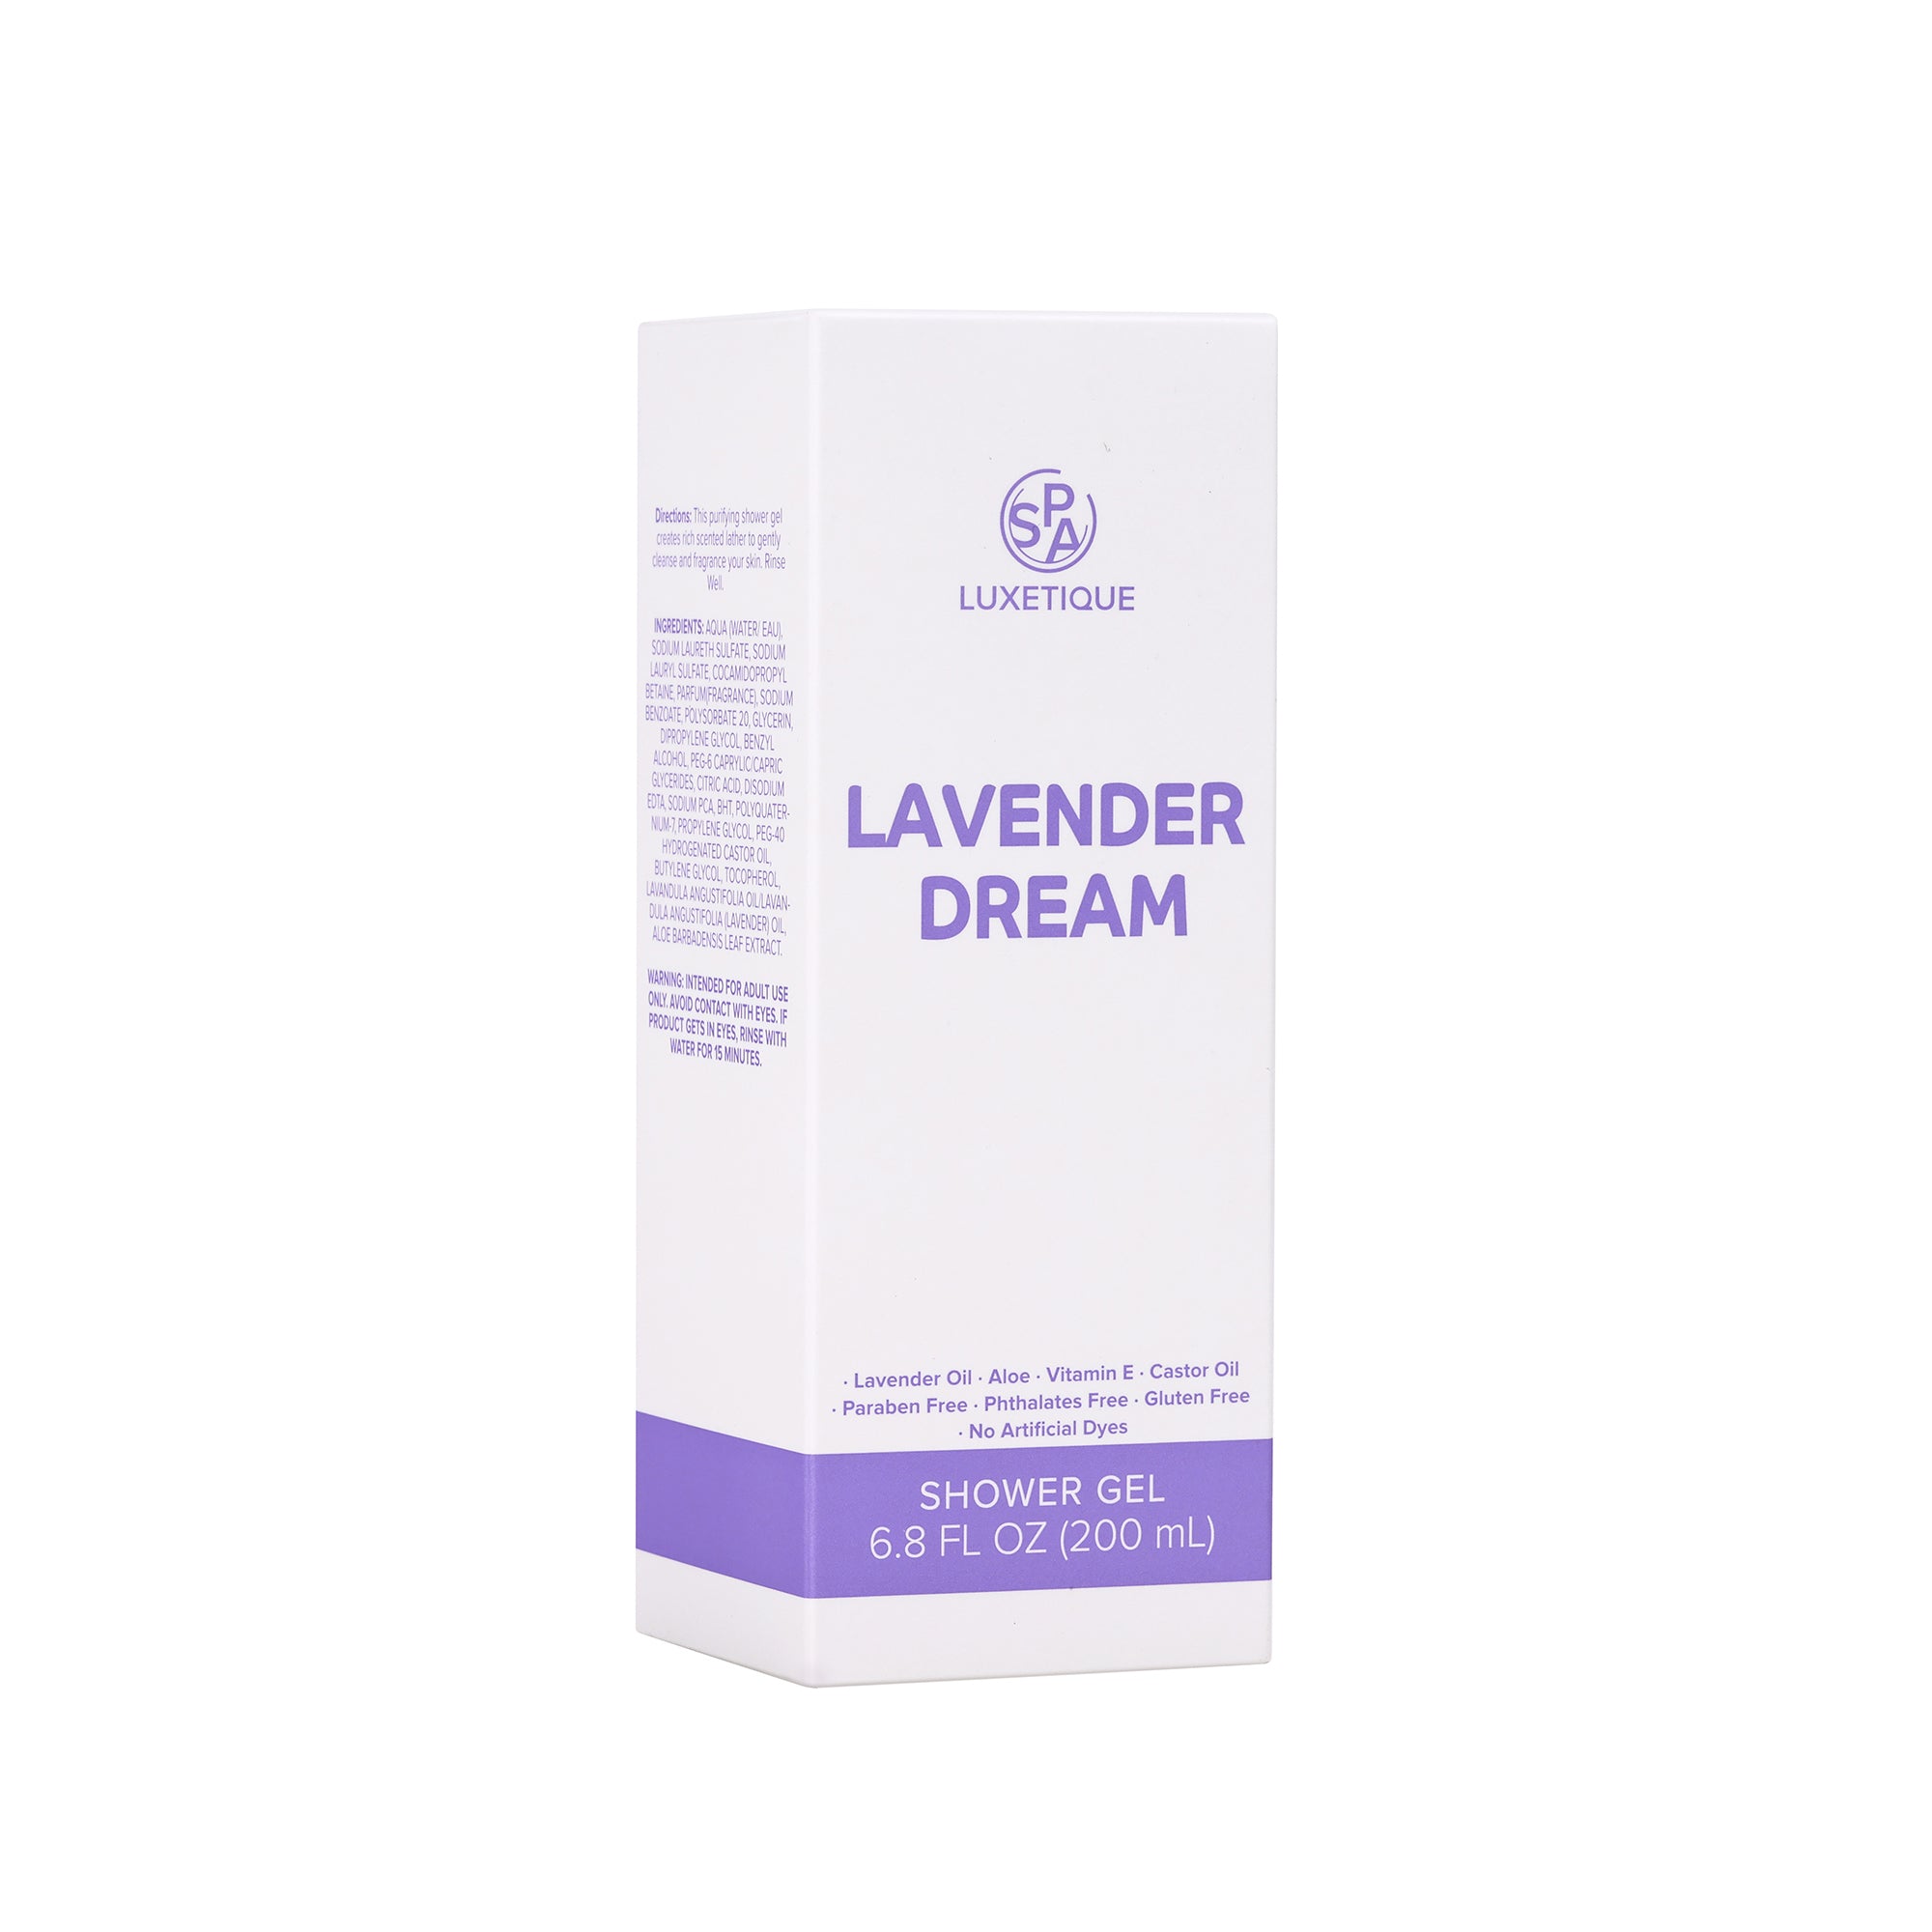 SPA Luxetique Lavender Dream Shower Gel. Contains gentle yet effective cleansing abilities using gentle ingredients. Simply lather the product in a silky smooth foam and rinse. Our formula is gentle on all skin types and leaves a subtle lavender fragrance.